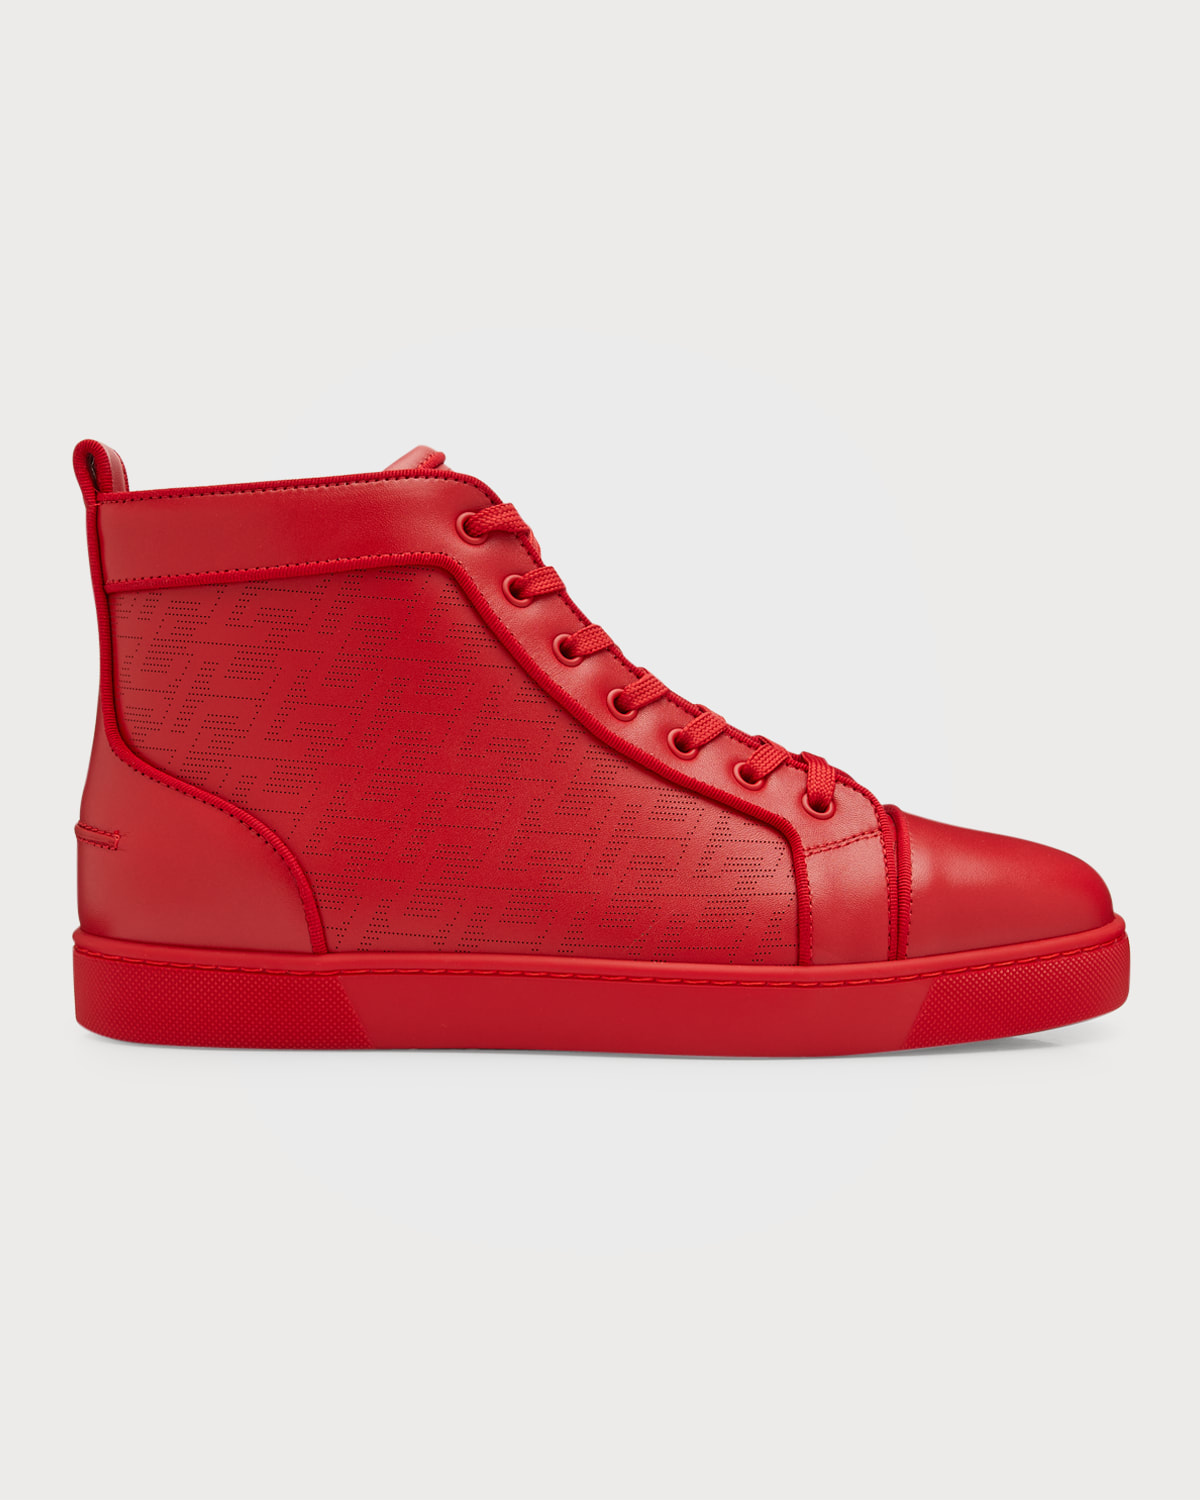 CHRISTIAN LOUBOUTIN MEN'S LOUIS TONAL PERFORATED LEATHER HIGH-TOP trainers